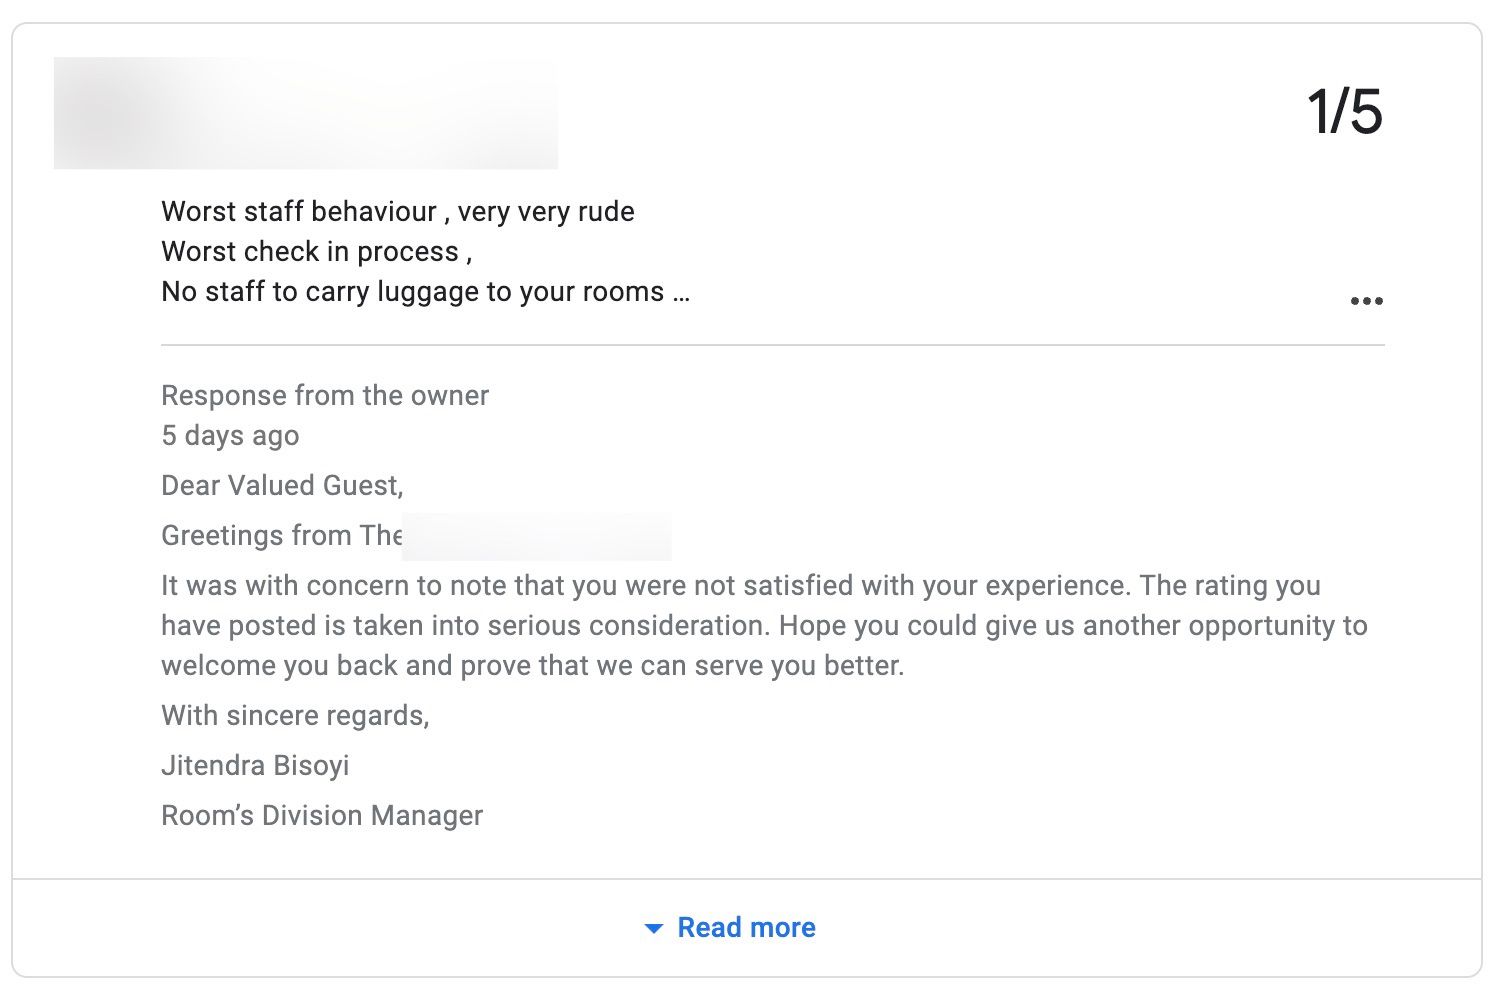 A screenshot of a review describing very bad customer service. The owner of the business replies to the post, apologizing and asking for the customer to give them another opportunity.